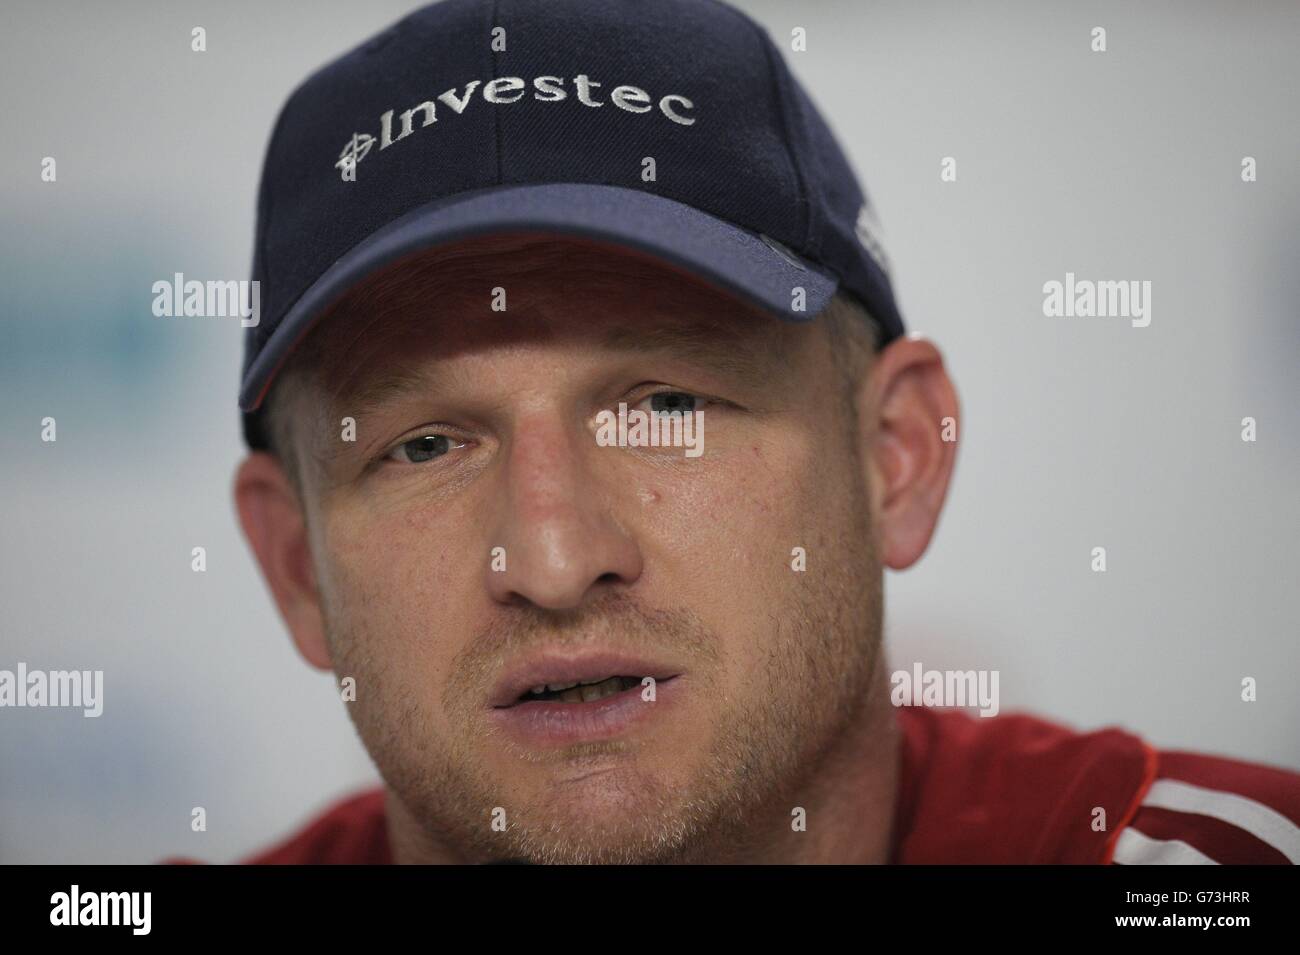 England head coach Jason Lee during a press conference after the playoff at the Rabobank Hockey World Cup in the Kyocera Stadium, Den Haag, Netherlands. Stock Photo